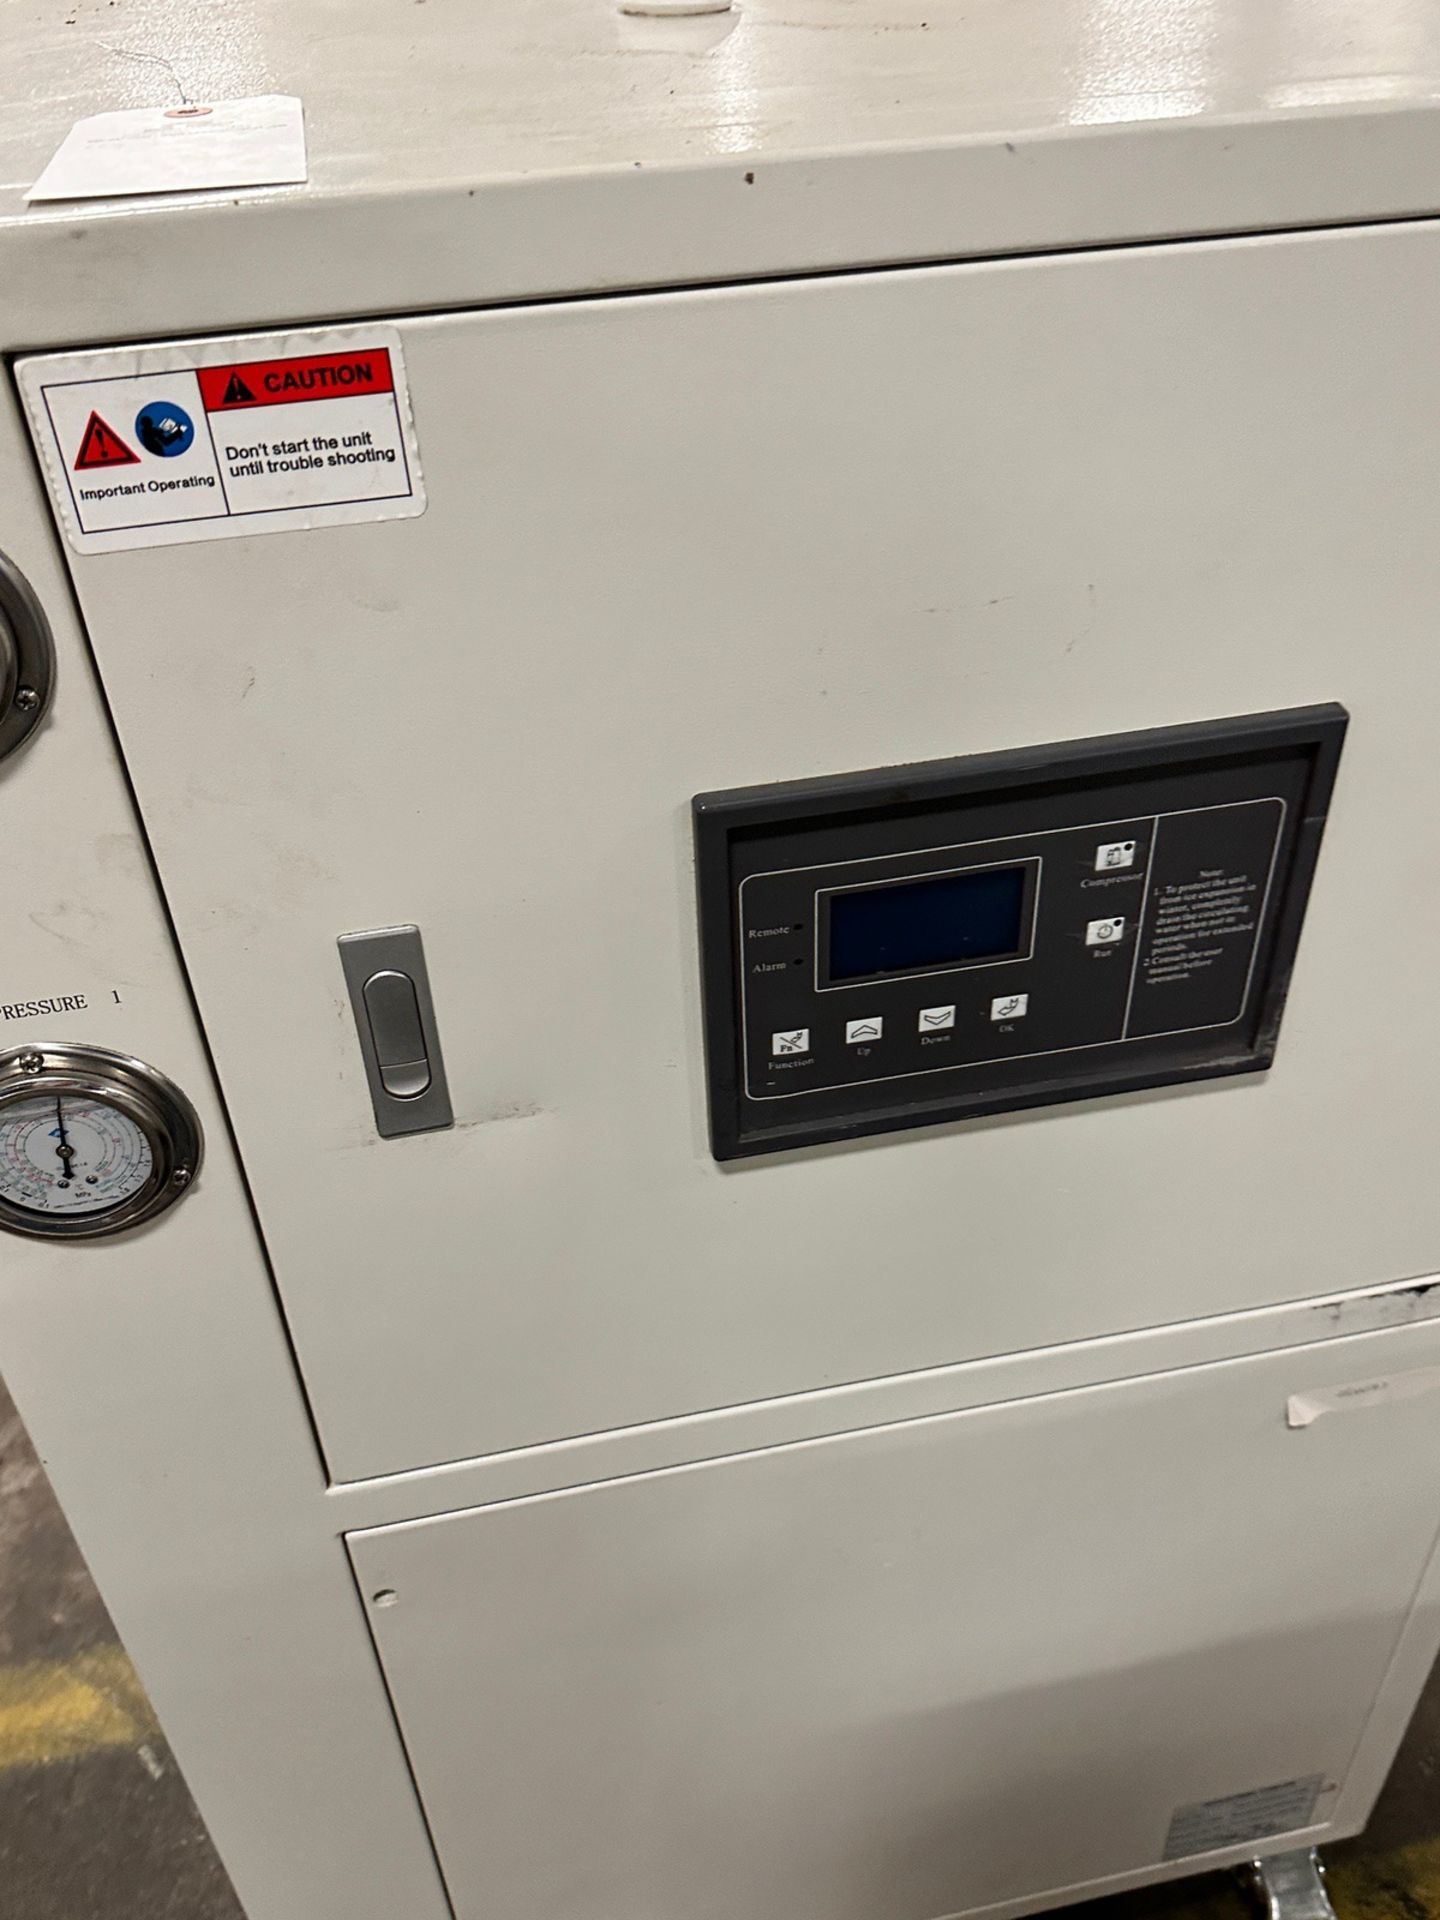 2018 Industrial Chiller Model HBC-1, 3 KW Cooling Power, S/N: 18100028-4 | Rig Fee $50 - Image 2 of 3